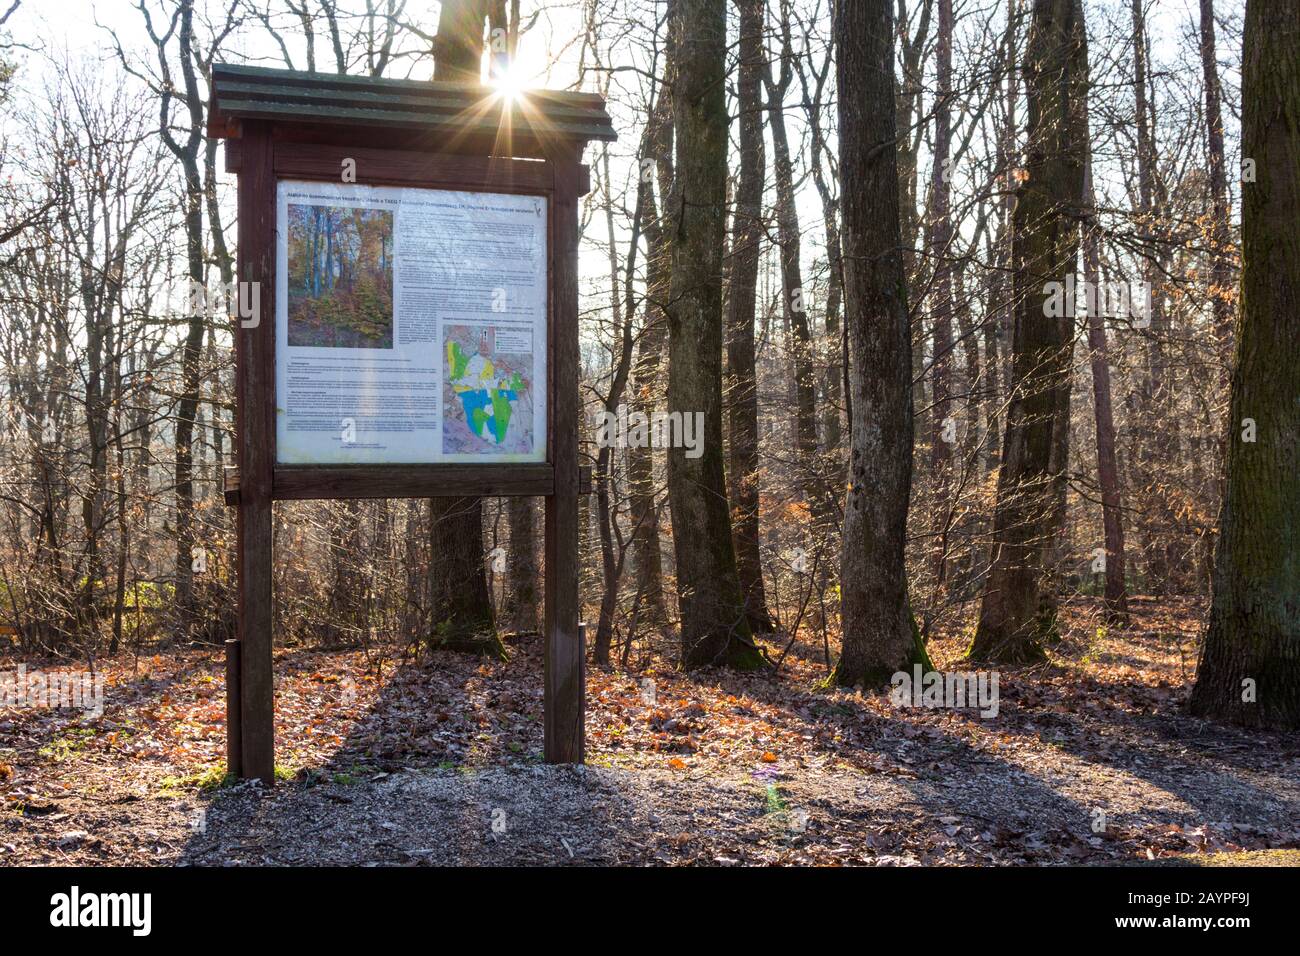 Information board about forestry by TAEG on Karoly-magaslat, Sopron Mountains,  Sopron, Hungary Stock Photo